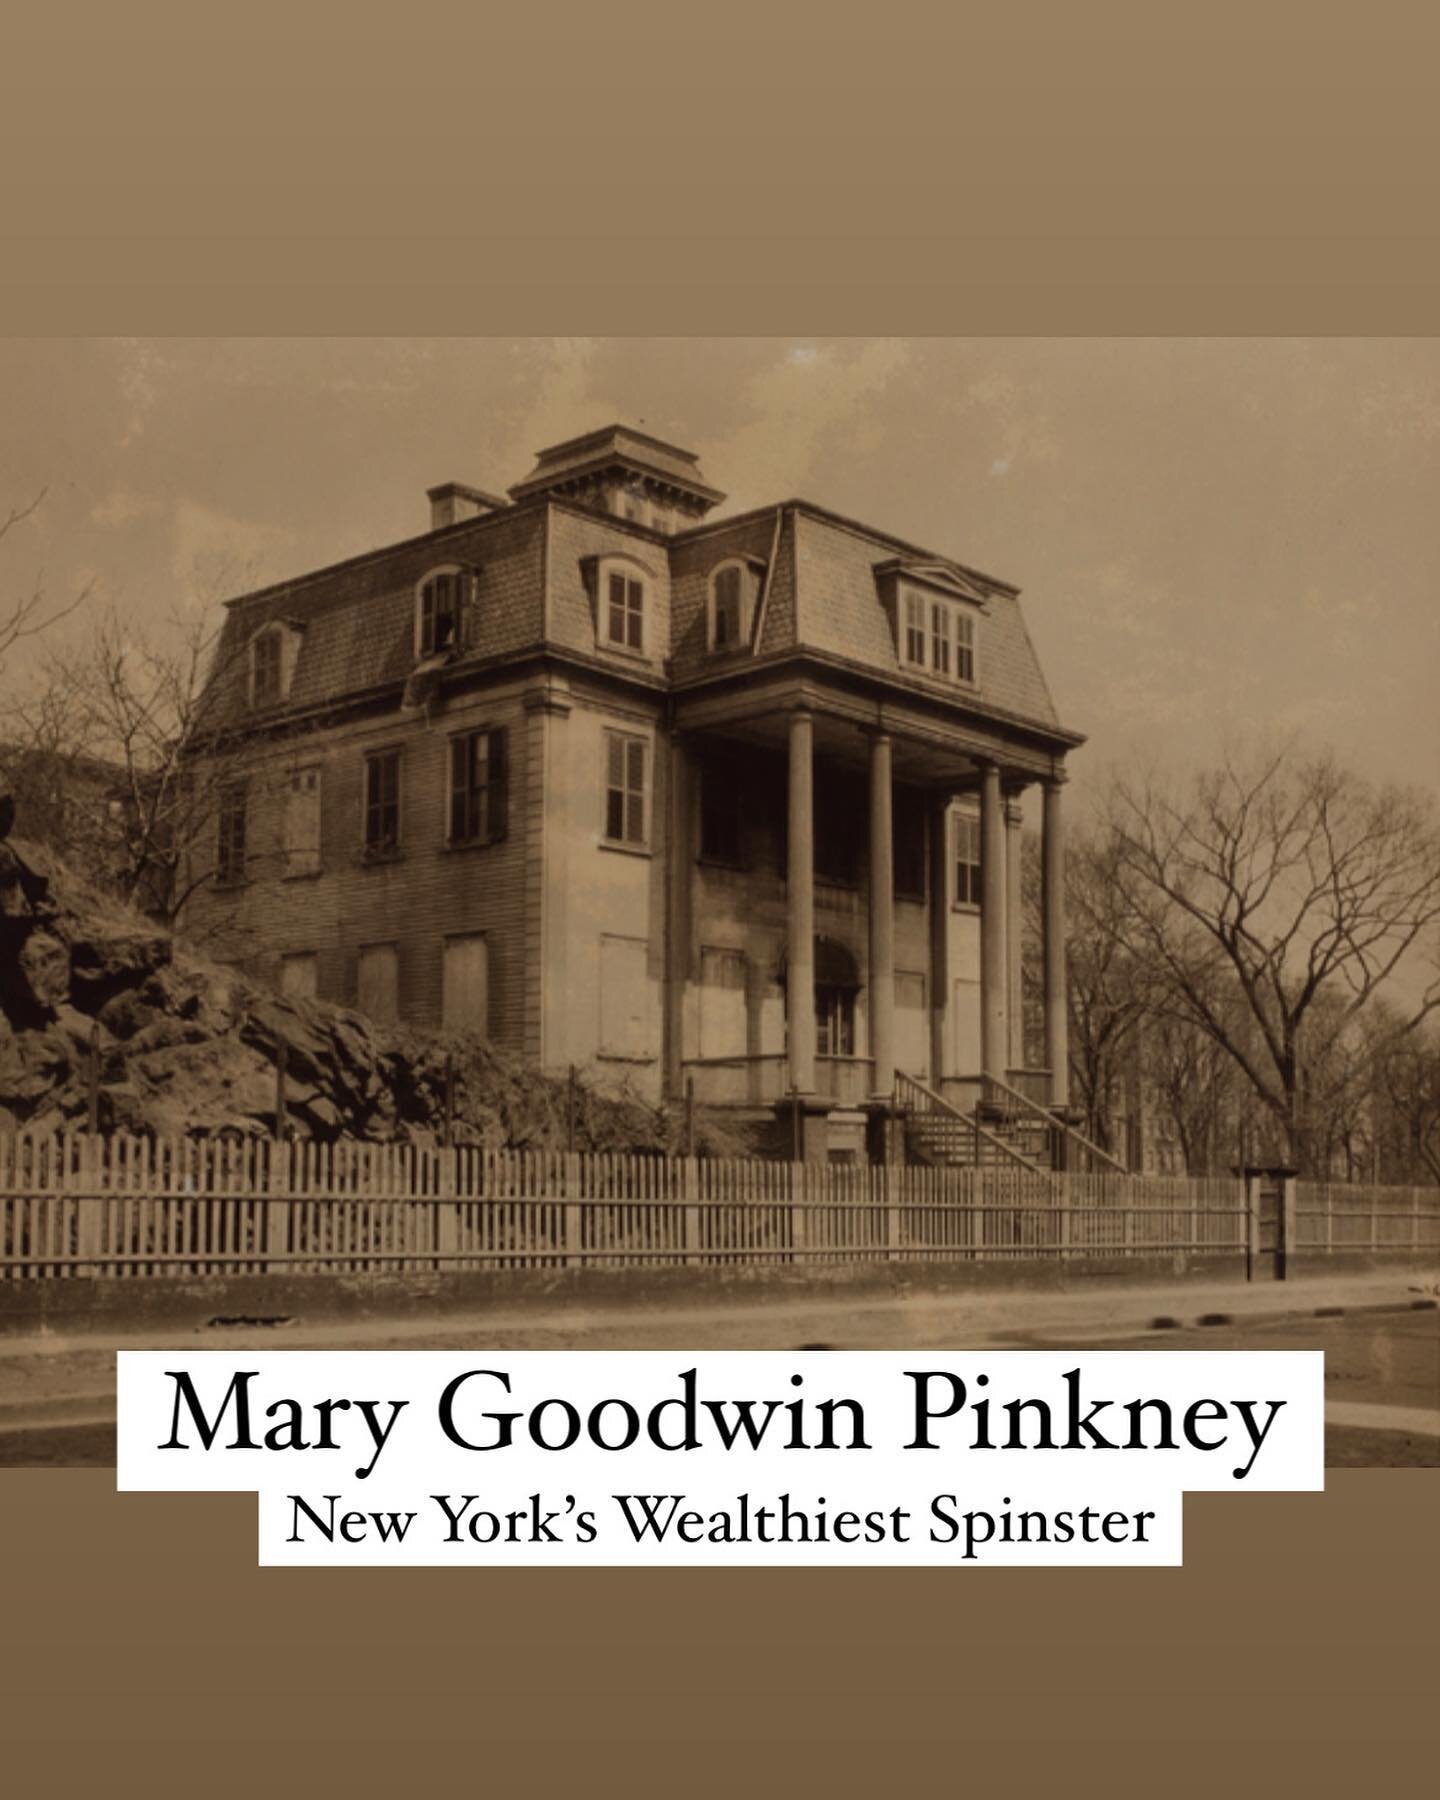 Mary Goodwin Pinkney was born in 1809 or 10 in Maryland, descended from a long line of wealthy and notable Pinkneys. After her father died in 1825, Mary&rsquo;s mother was wed to Archibald Watt, an upwardly-mobile Scottish immigrant who was active in